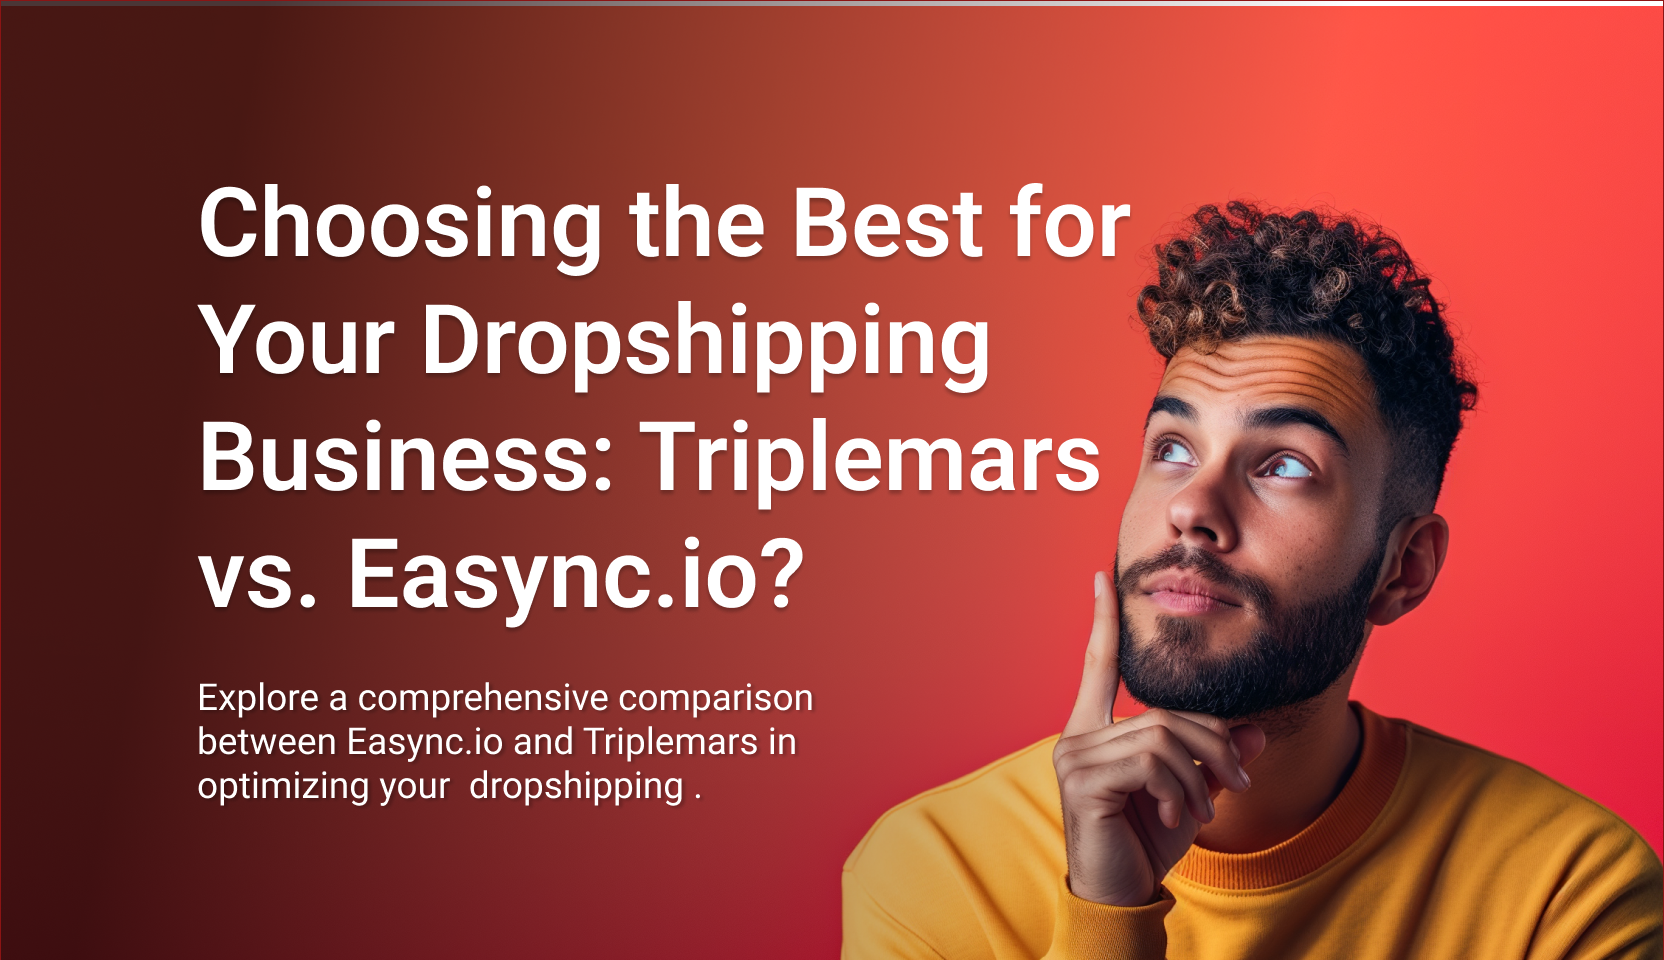 Easync.io: Revolutionizing Dropshipping with Automated Fulfillment and Price Tracking